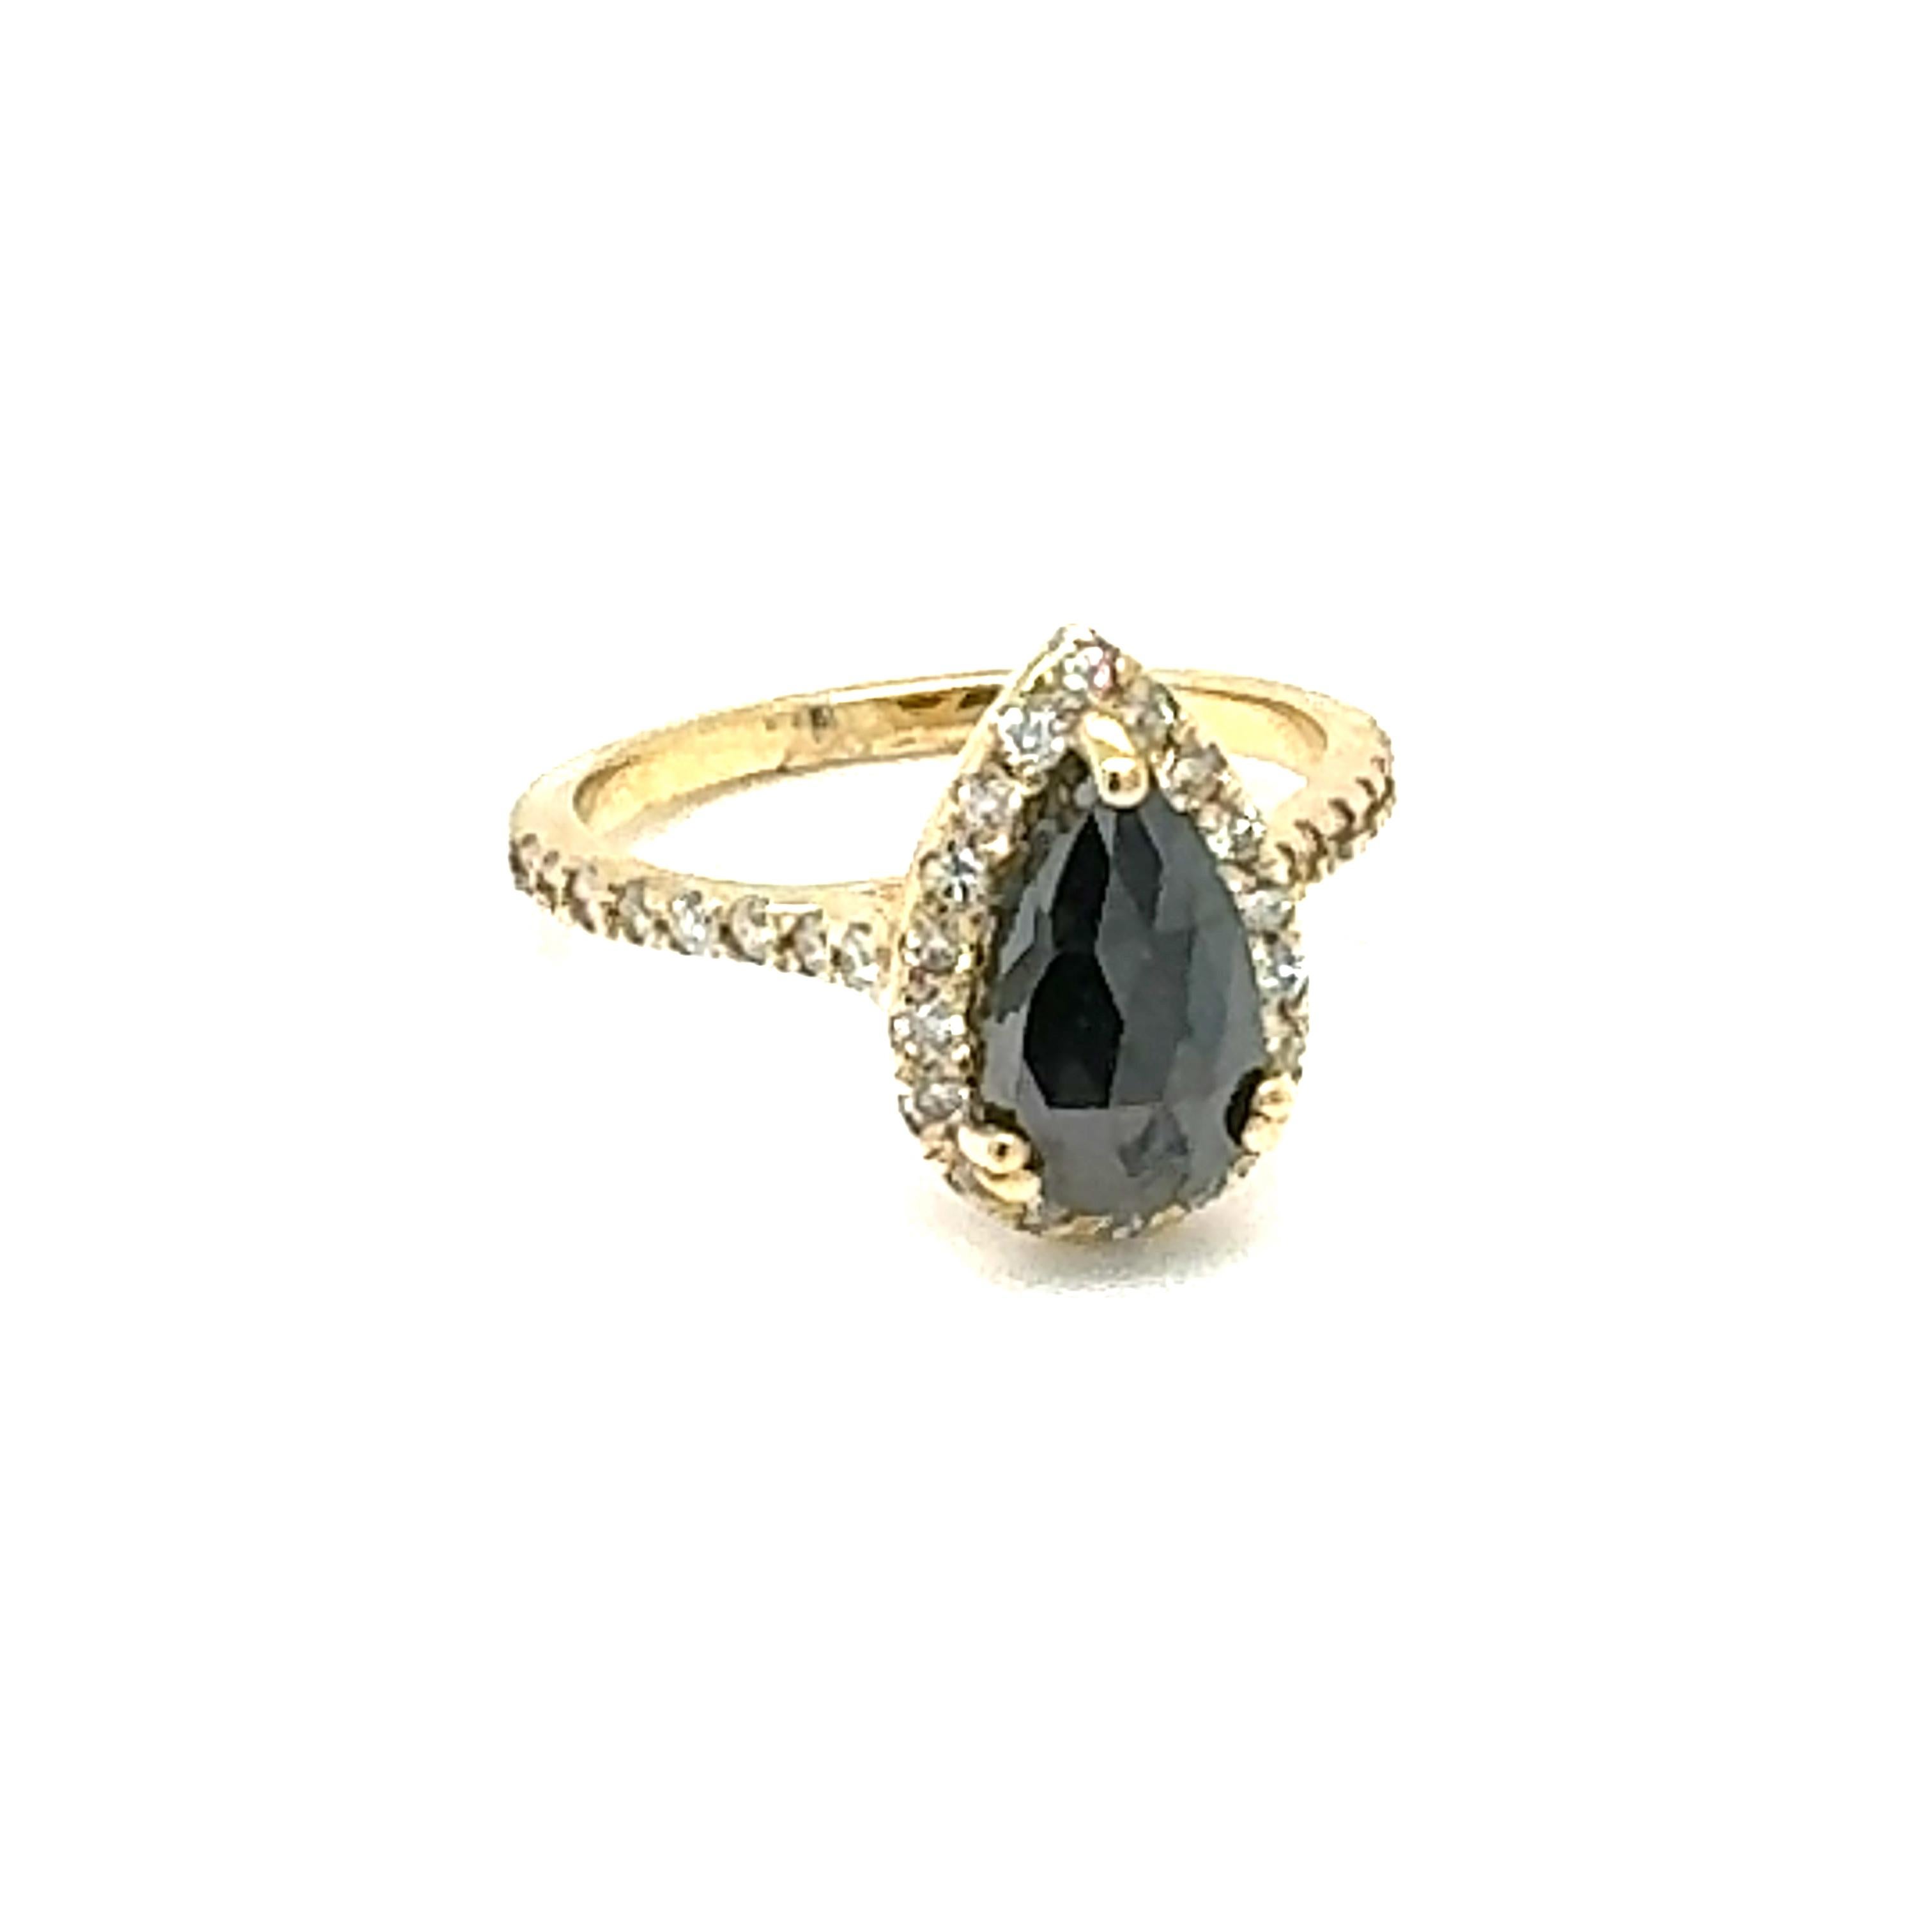 2.06 Carat Pear Cut Halo Black Diamond Yellow Gold Engagement Ring

There is a 1.65 Carat Pear Cut Black Diamond in the center on the ring which is surrounded by a Halo of  34 White Round Cut Diamonds that weigh 0.41 Carats (Clarity: VS, Color: H)  